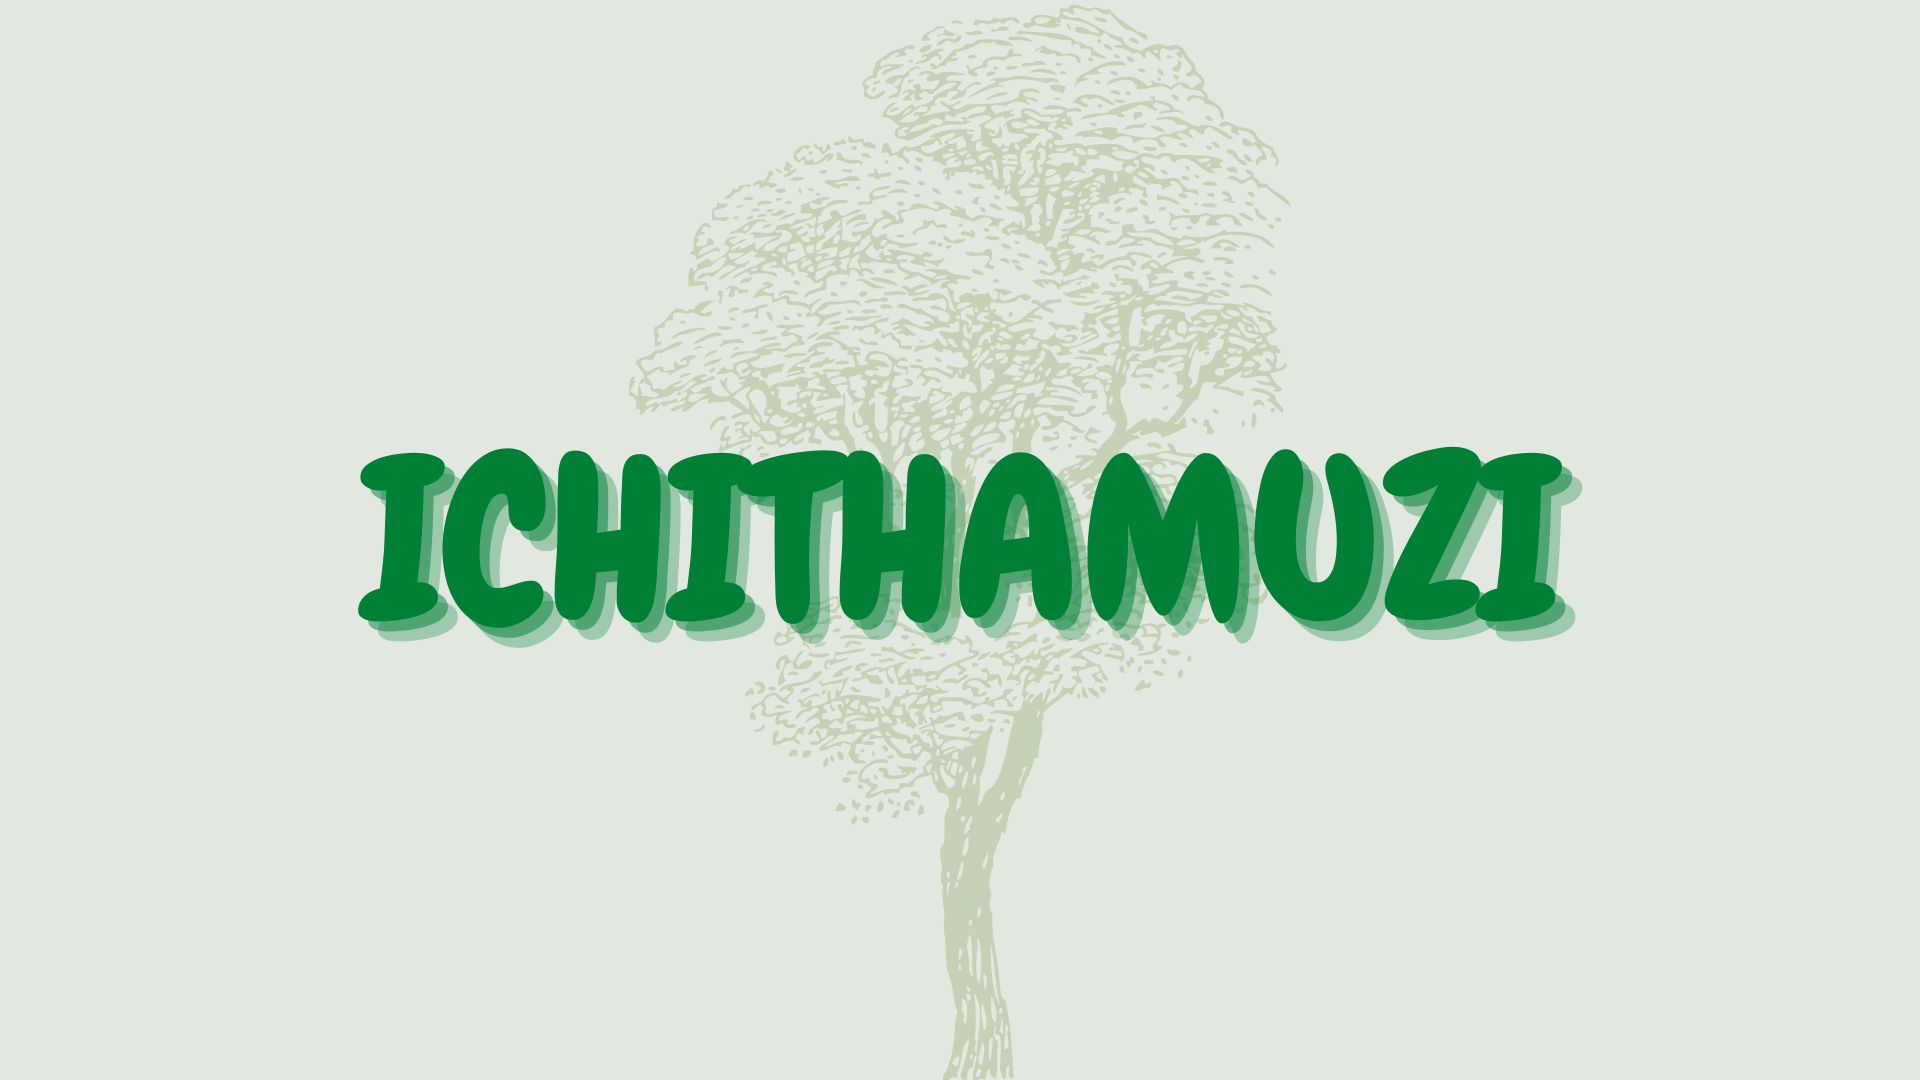 You are currently viewing Ichithamuzi